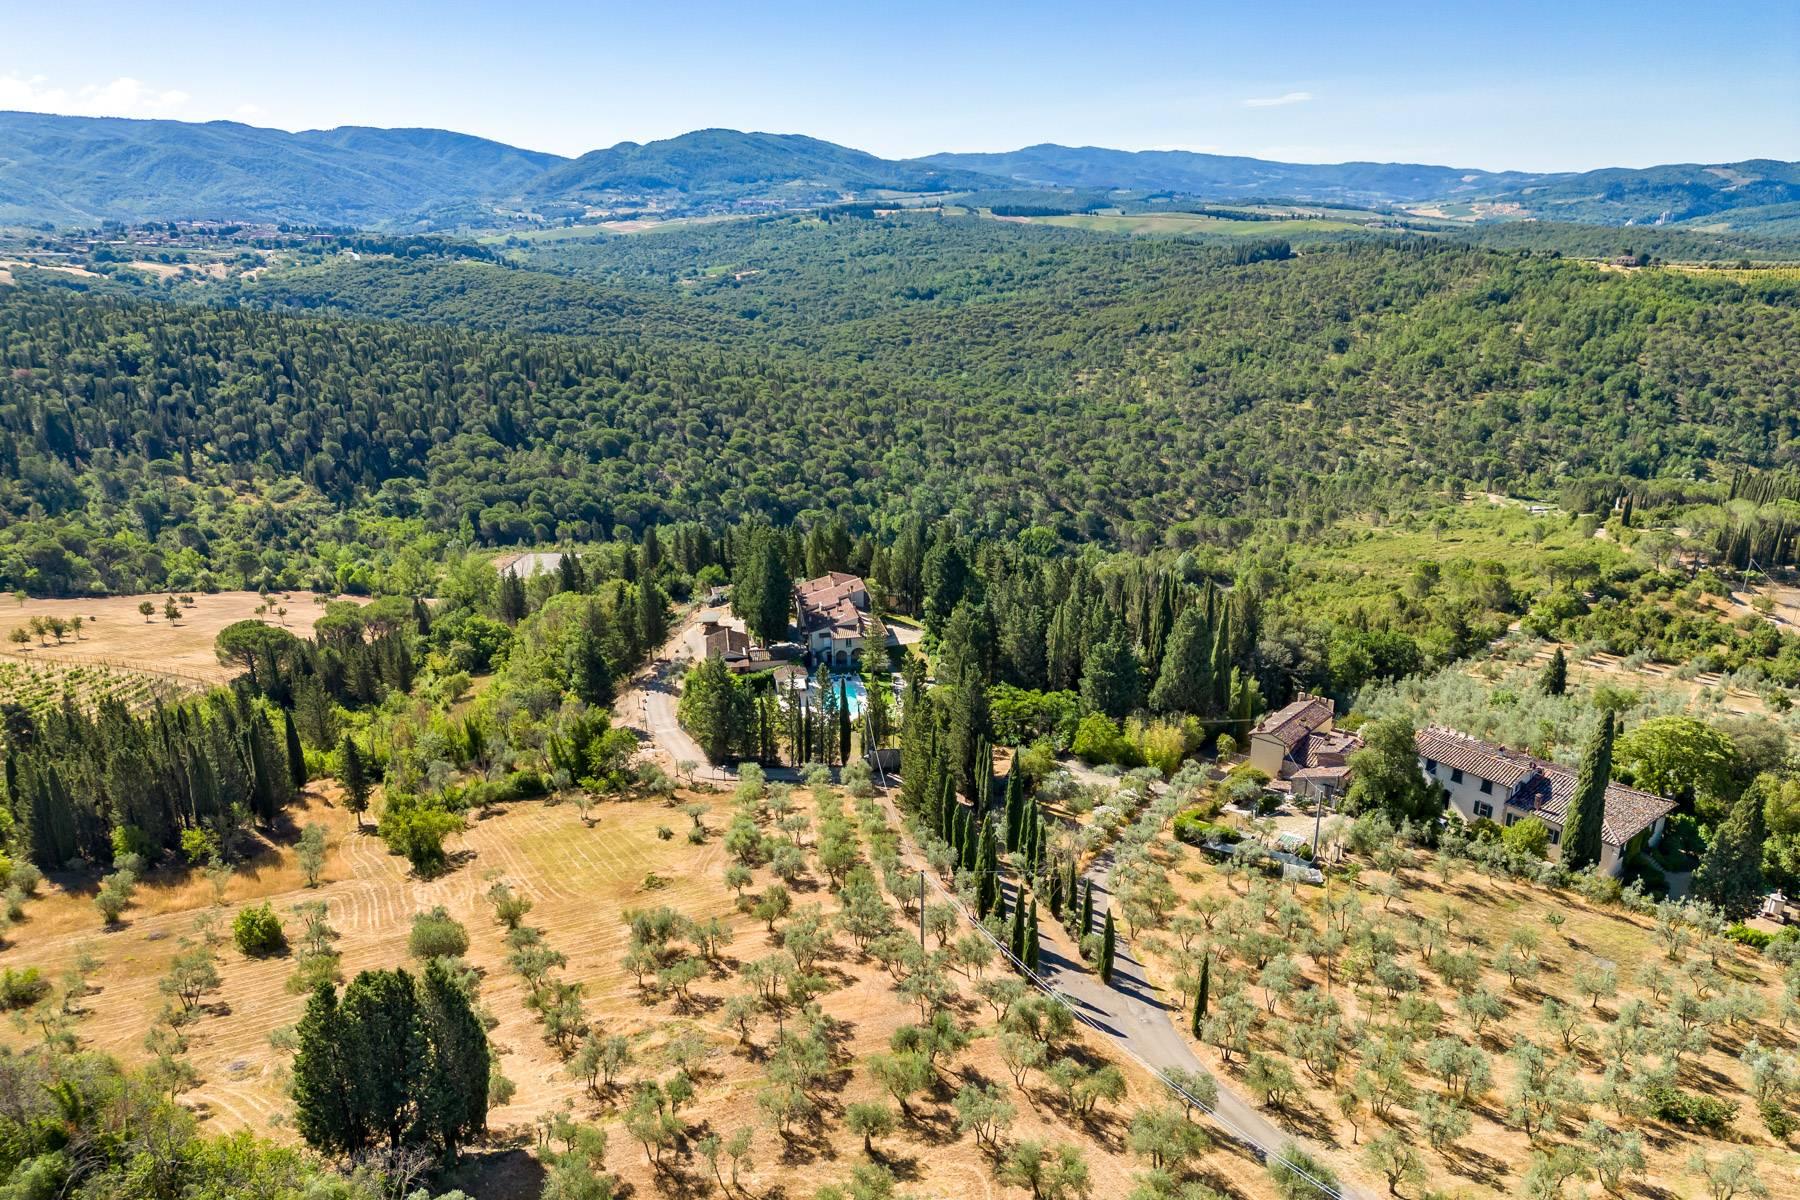 Unprecedented turn-key estate with pool in Impruneta at 15 minutes from Florence - 3